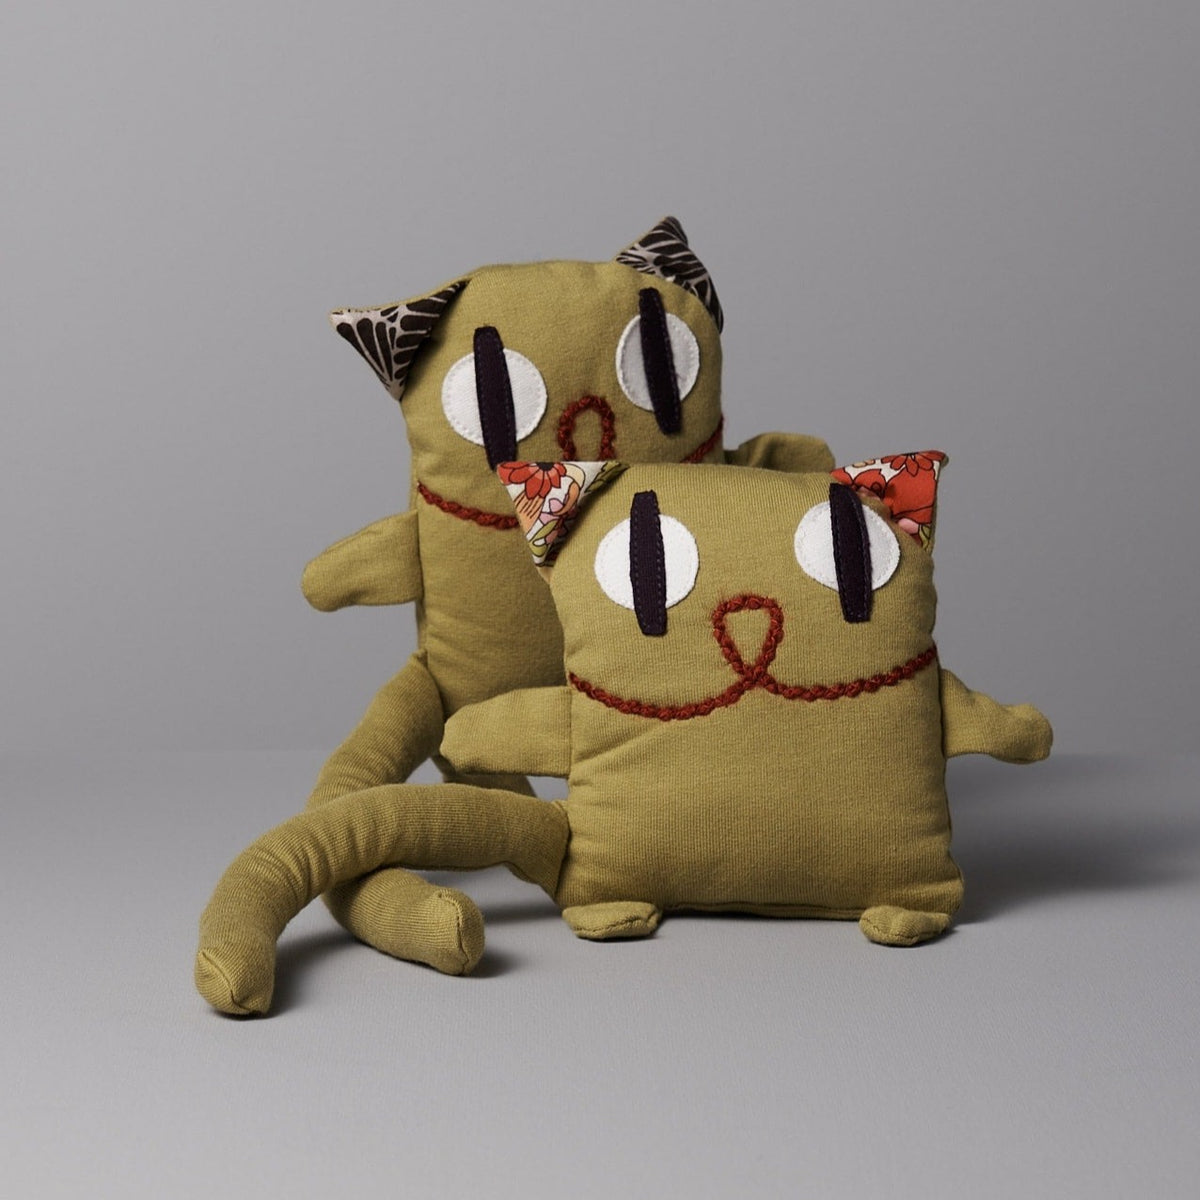 A pair of Raplapla stuffed cats with eyes on them: Serge the Cat.